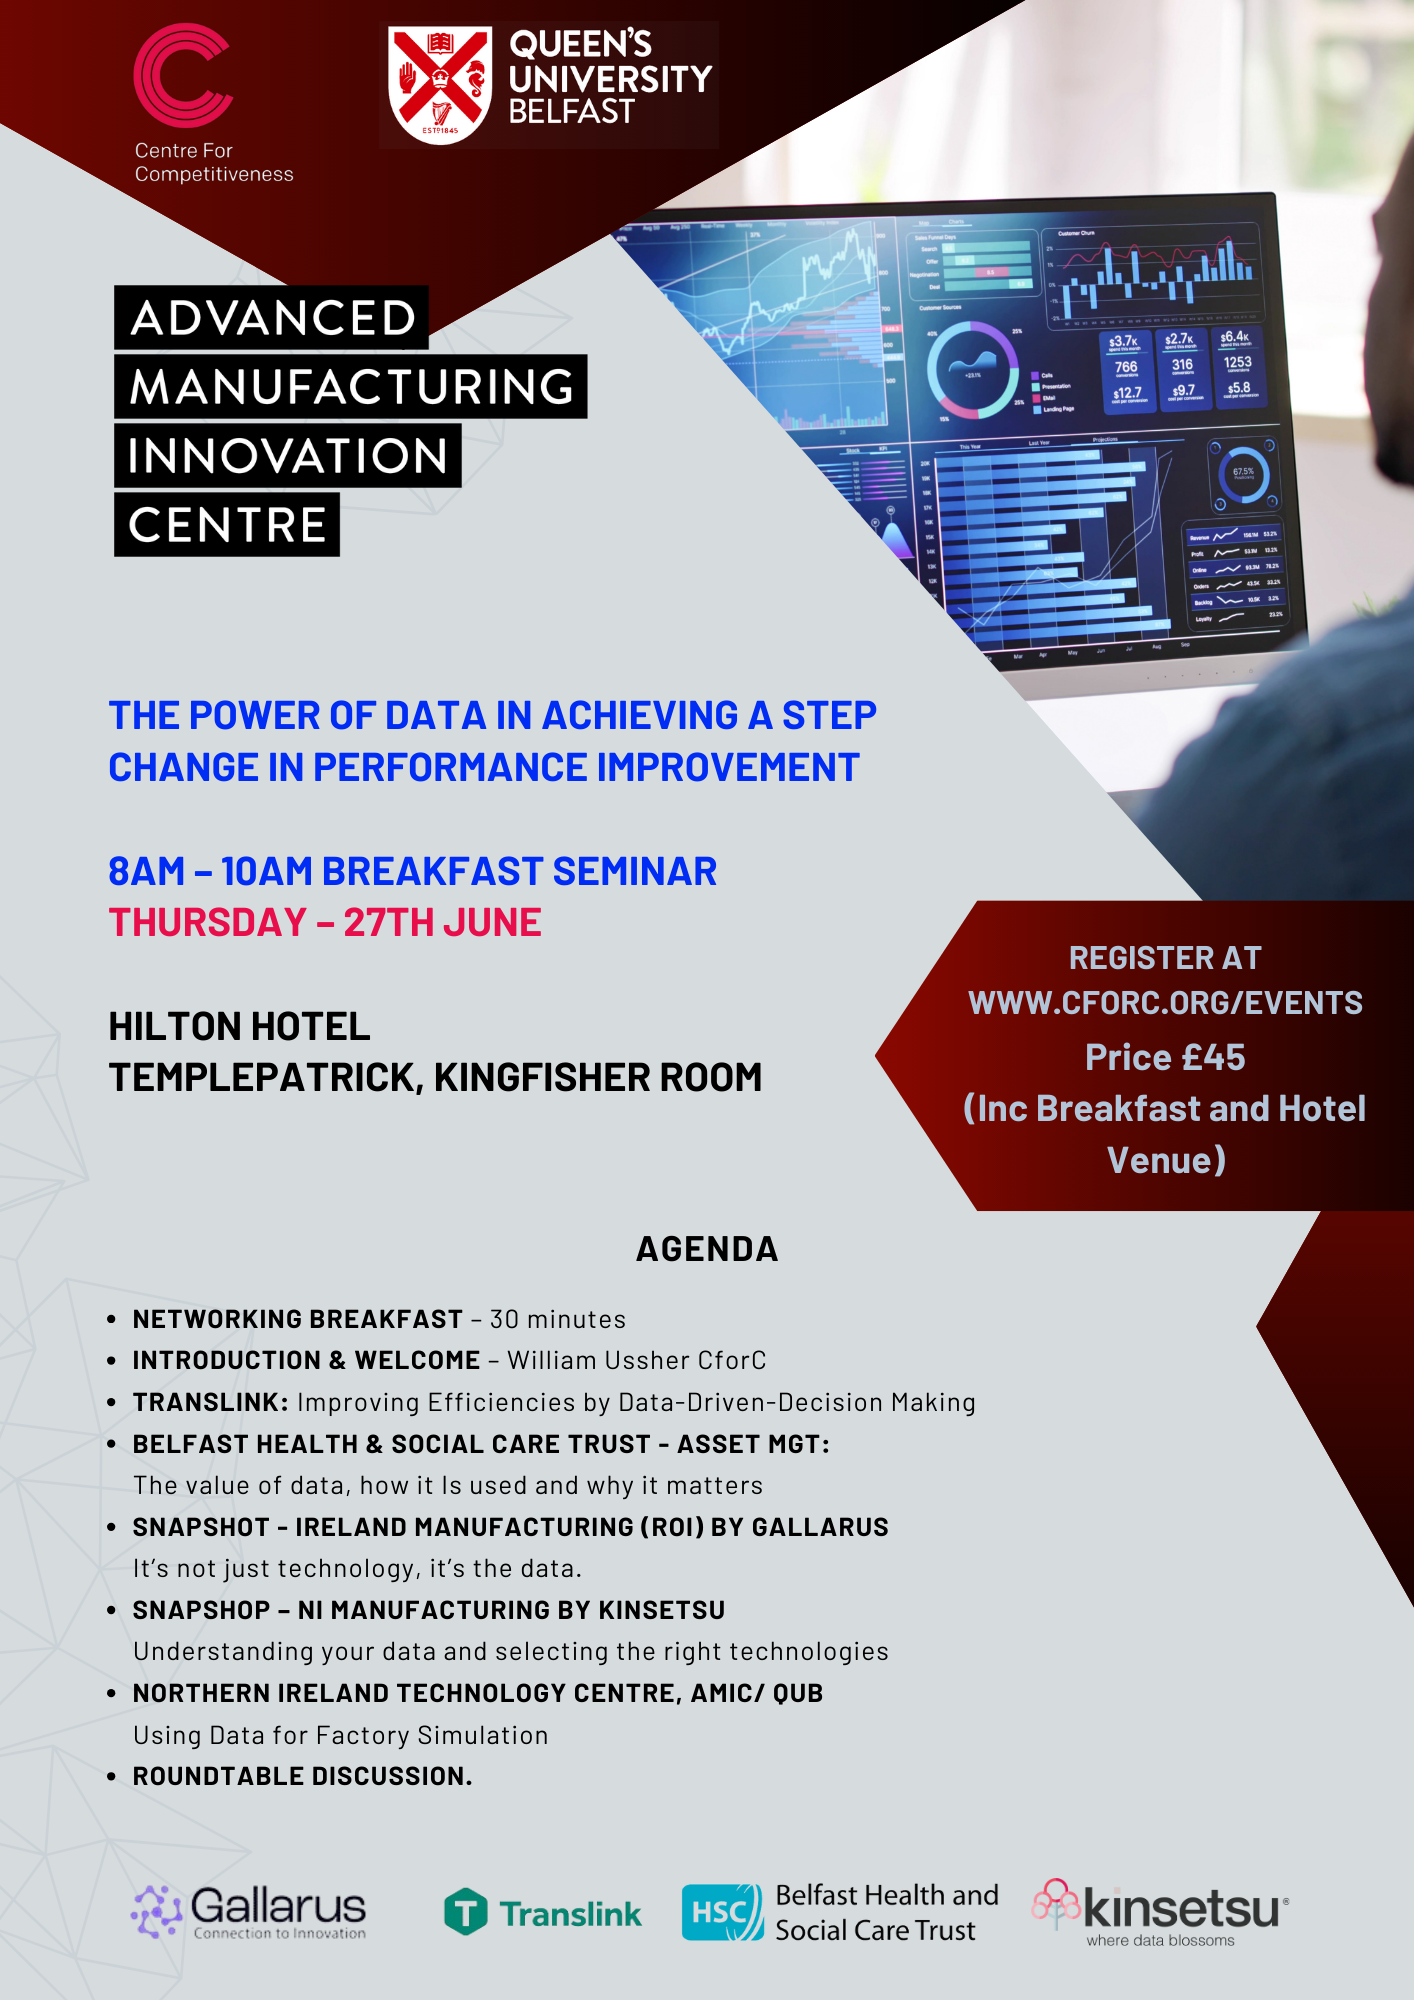 Breakfast Seminar - The Power of Data in Achieving a Step Change in Performance Improvement